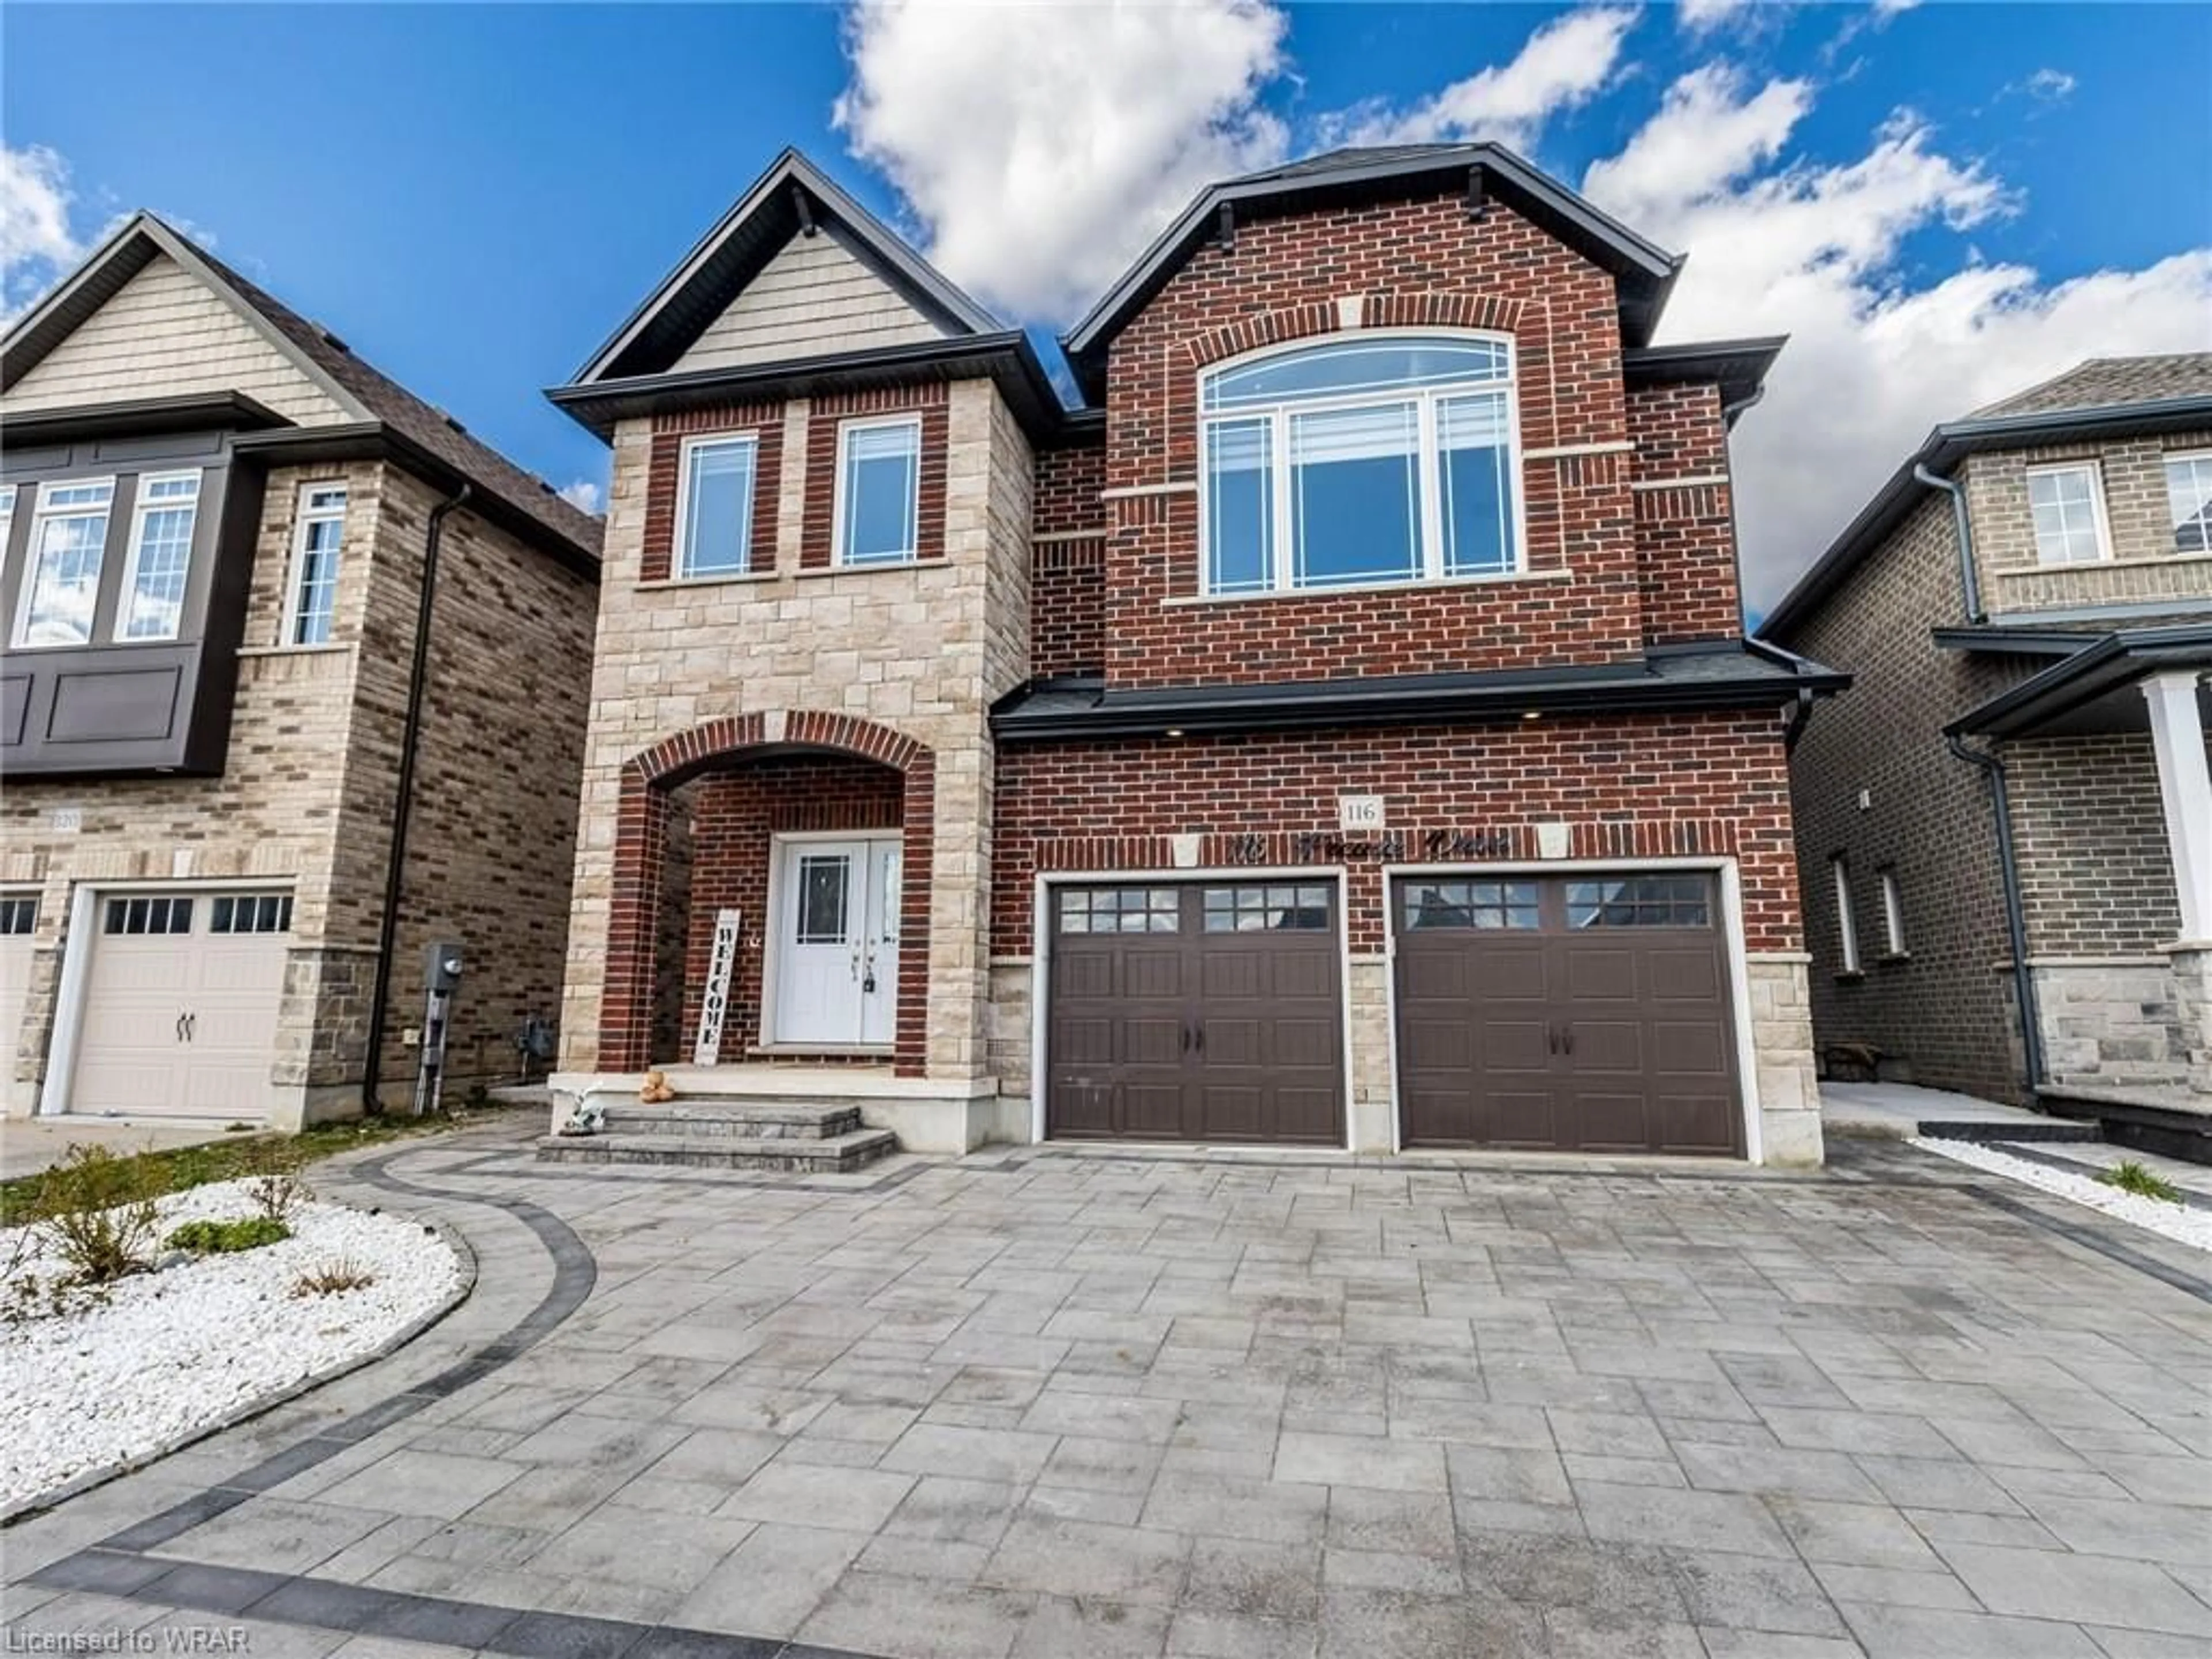 Home with brick exterior material for 116 Freure Dr, Cambridge Ontario N1S 0B4